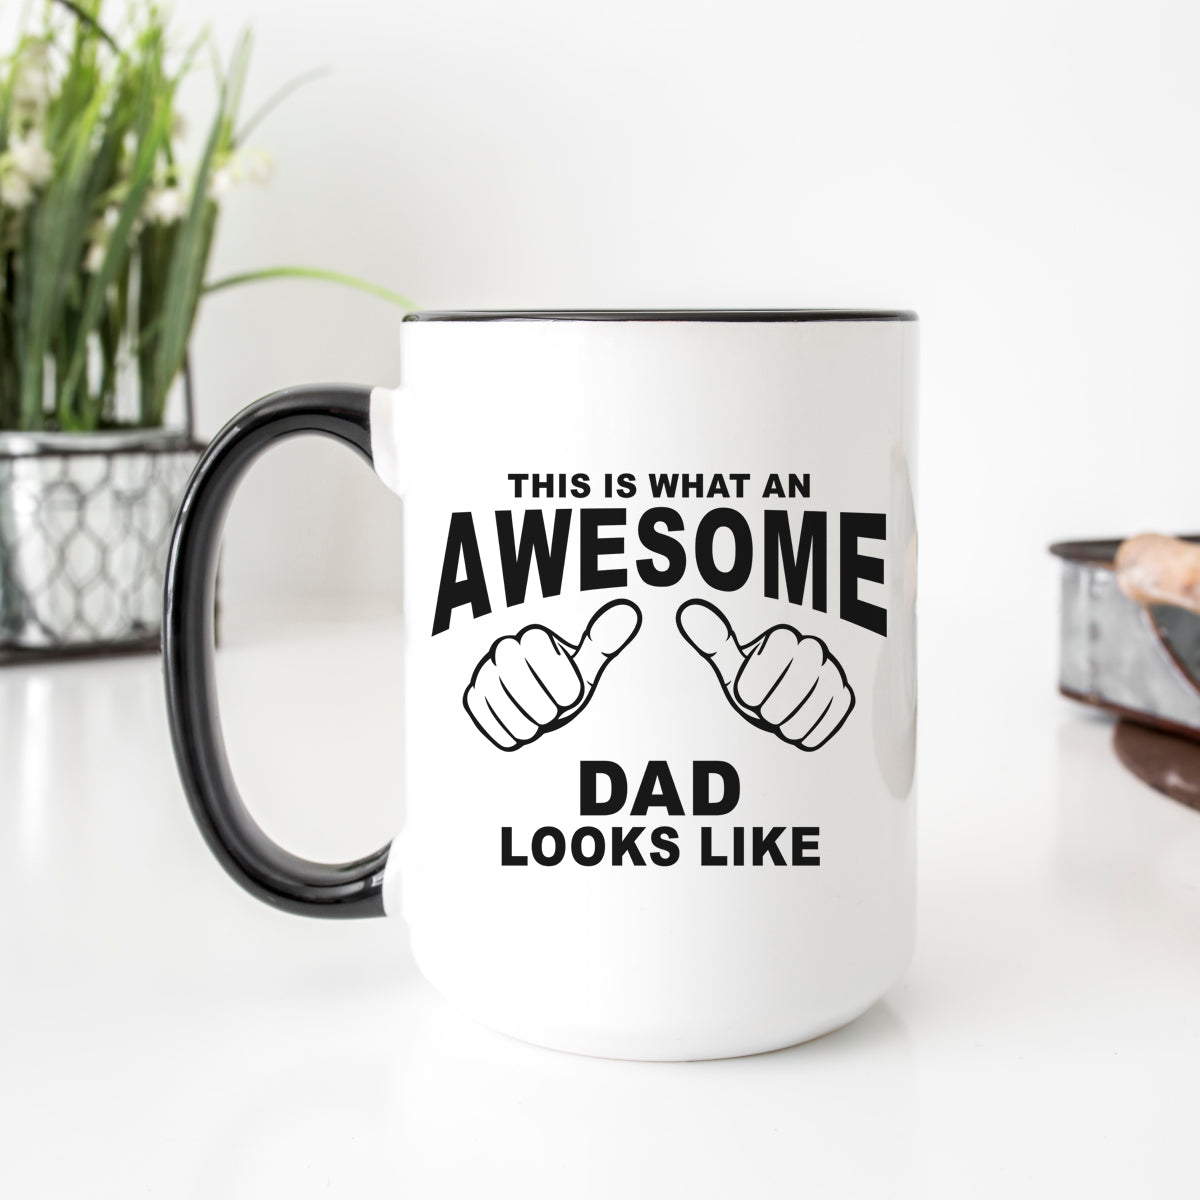 This Is What An Awesome Dad Looks Like Mug